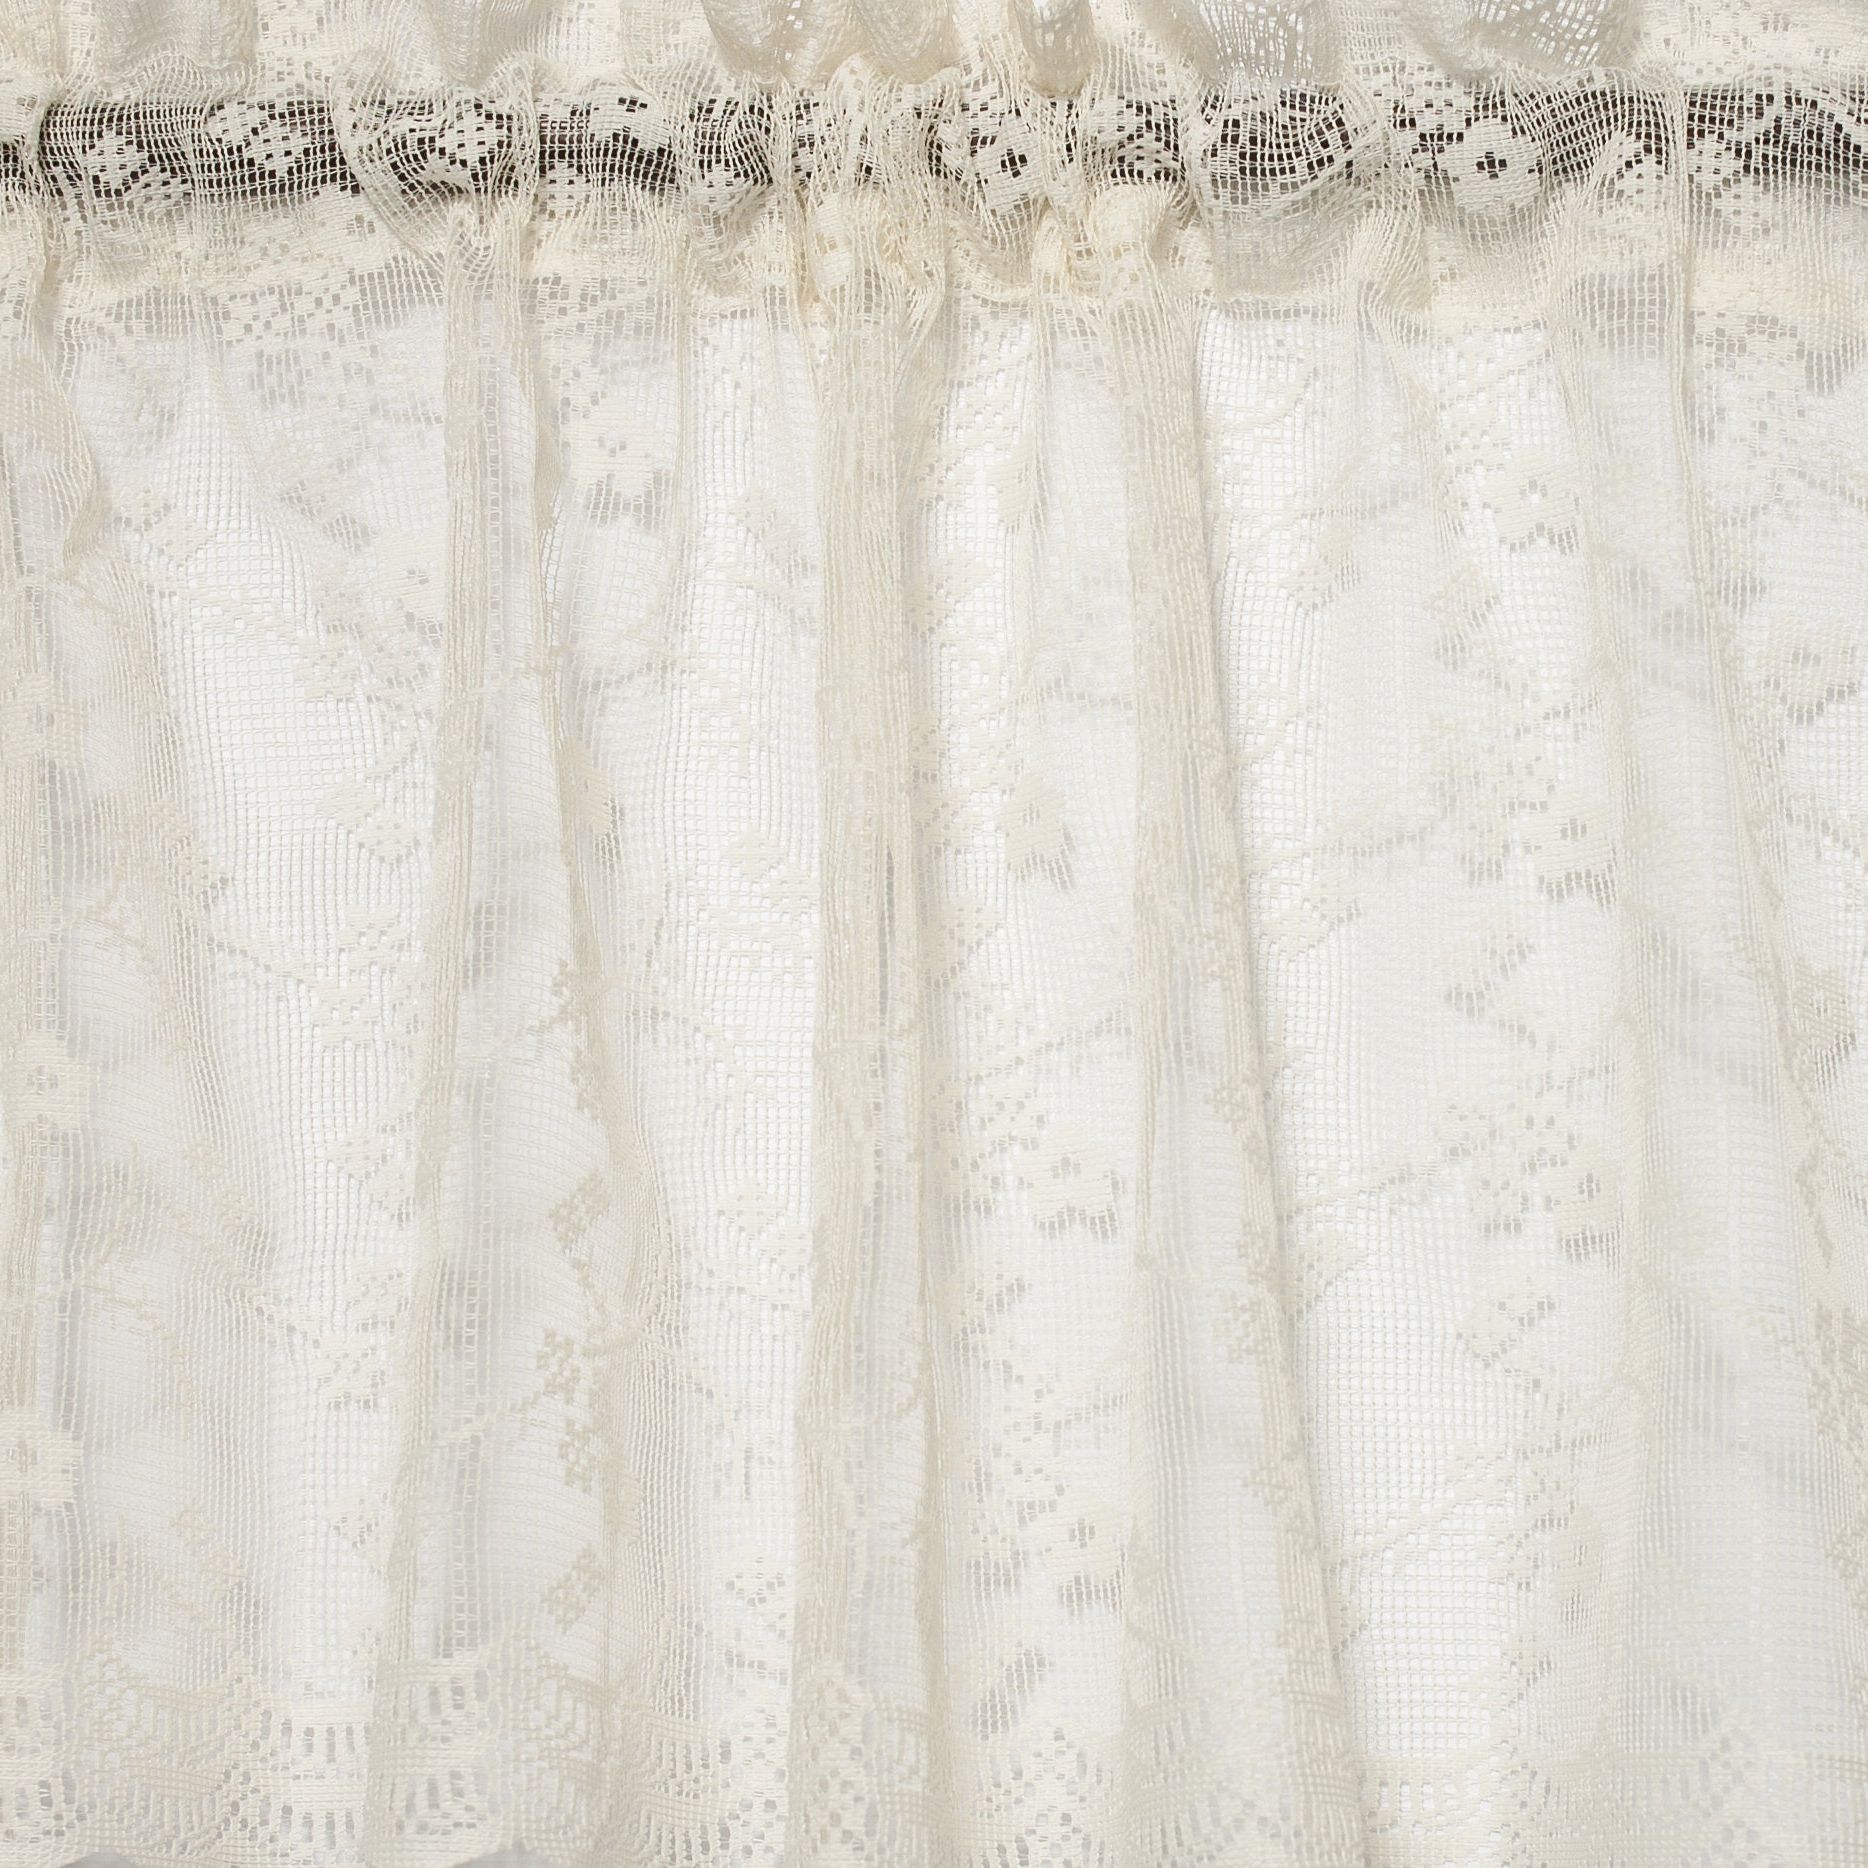 Elegant Ivory Priscilla Lace Kitchen Curtain Pieces  Tier, Swag And Valance  Options Pertaining To Most Popular Elegant White Priscilla Lace Kitchen Curtain Pieces (View 5 of 20)